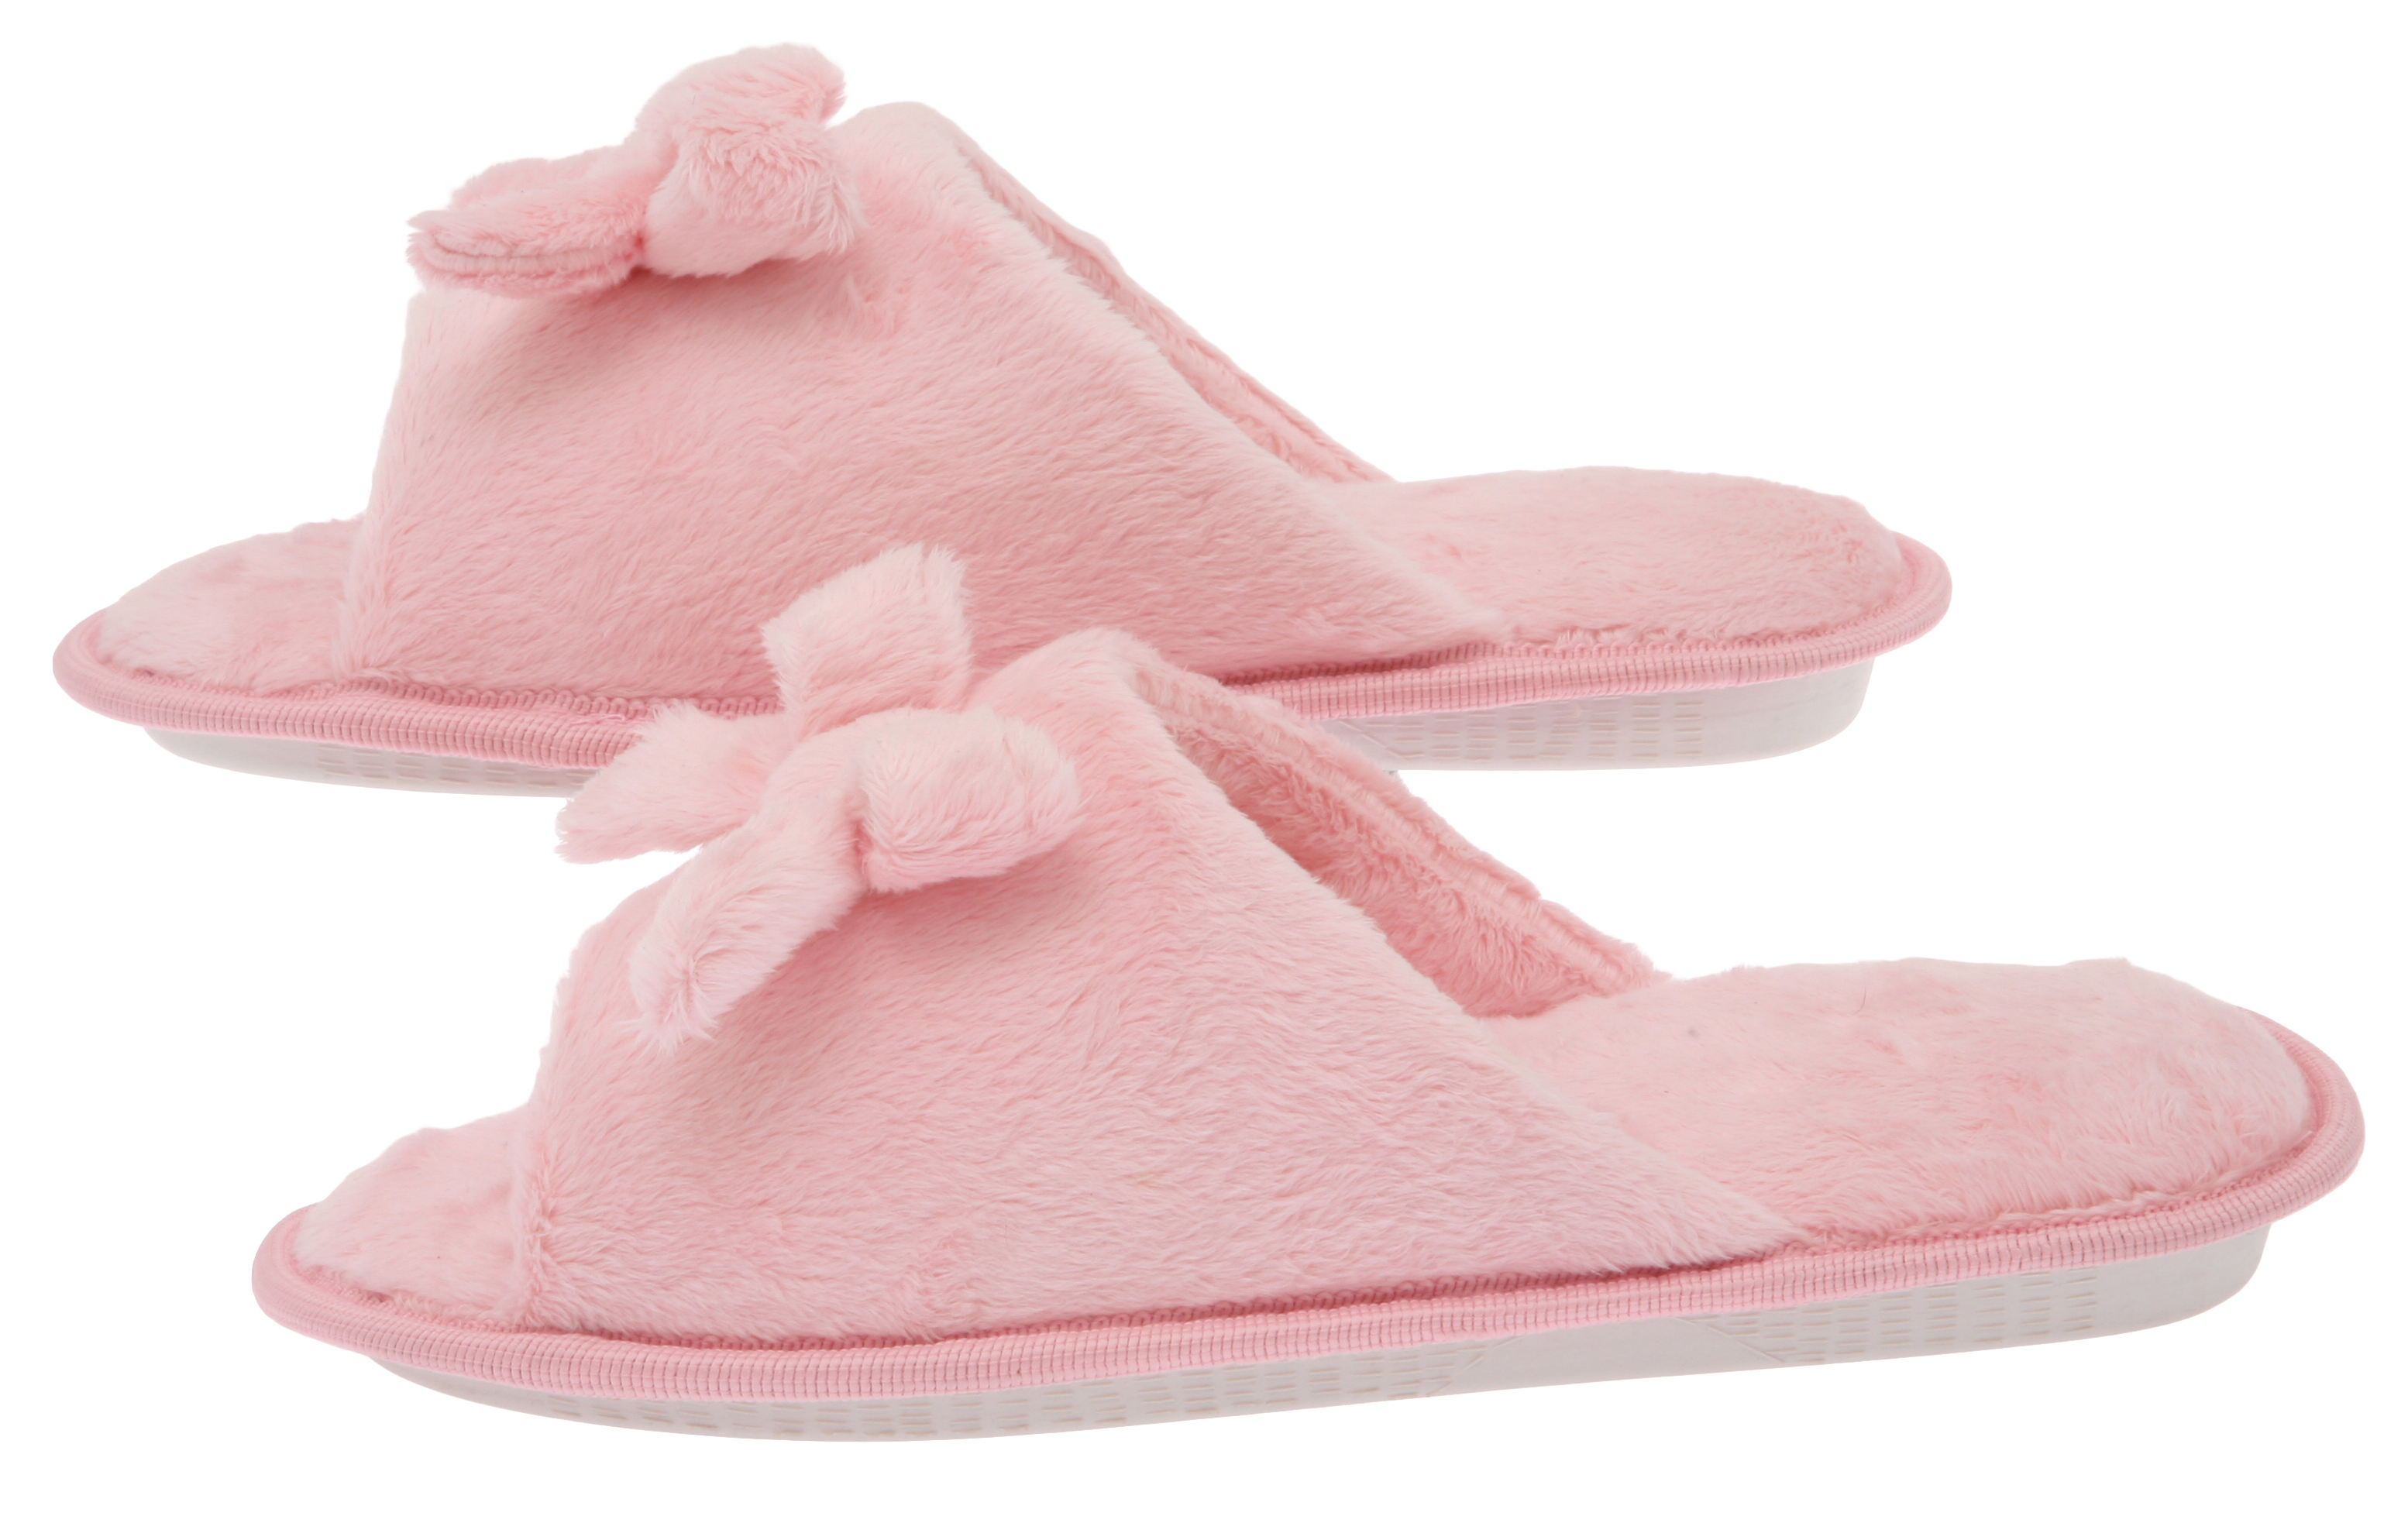 Living Healthy Products Womens Butterfly Bow Slip-On Memory Foam House Slippers, Size 5-6 - Open Toe - Pamper Your Feet - Pink